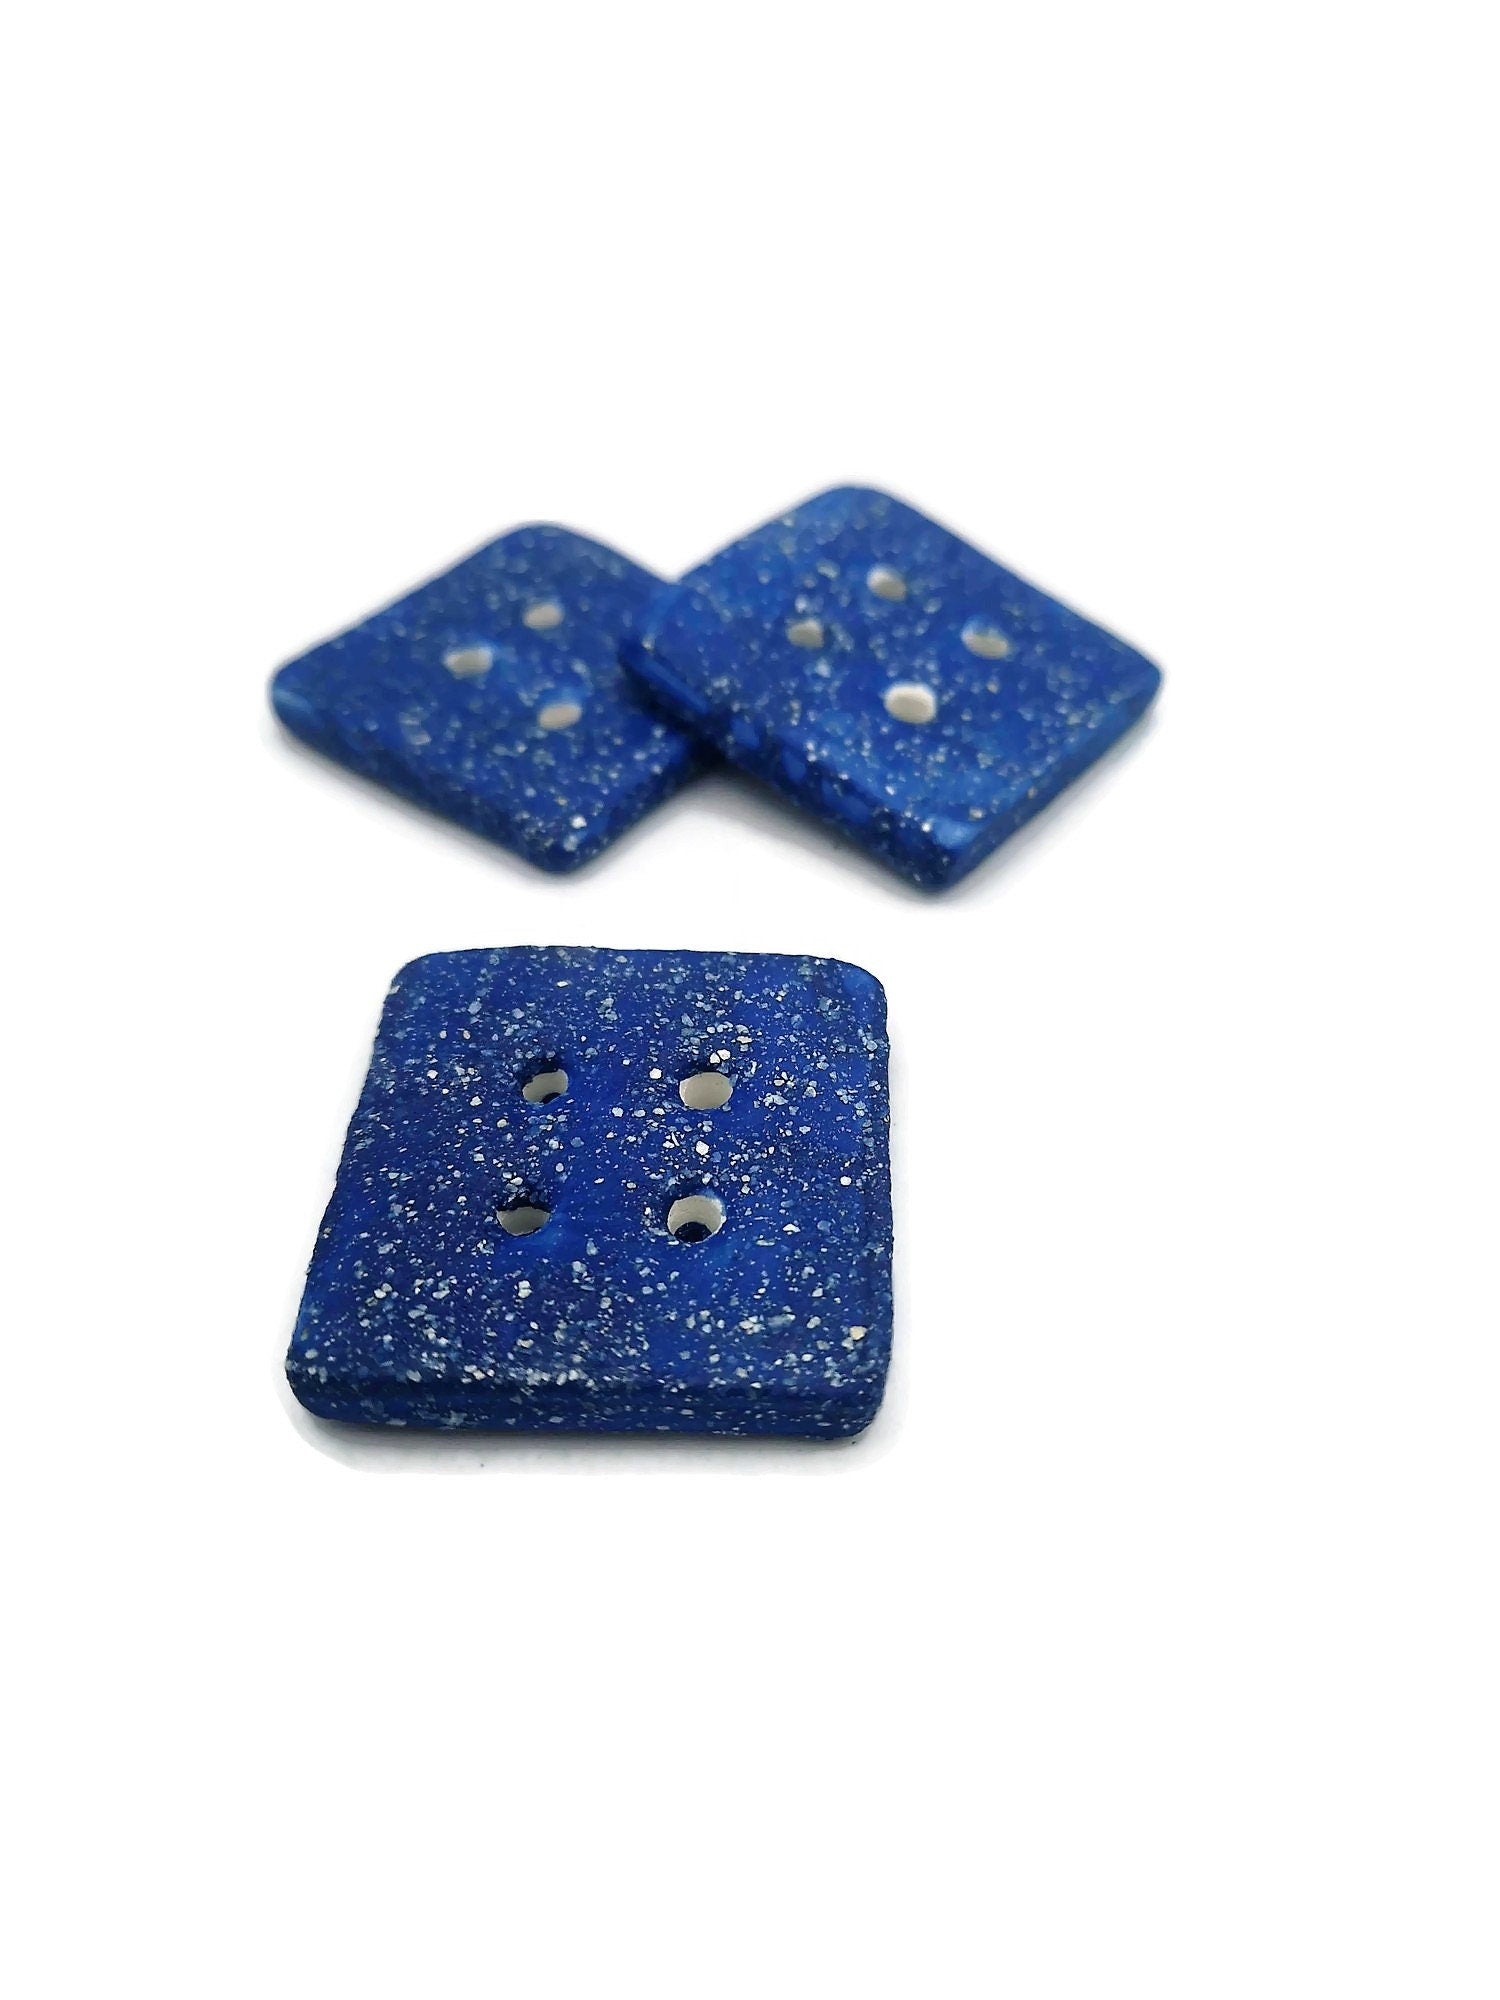 3Pc Extra Large Coat Buttons 40mm, Sparkly Blue Novelty Square Handmade Ceramic Sewing Supplies And Notions, Sewing Buttons For Blouse - Ceramica Ana Rafael